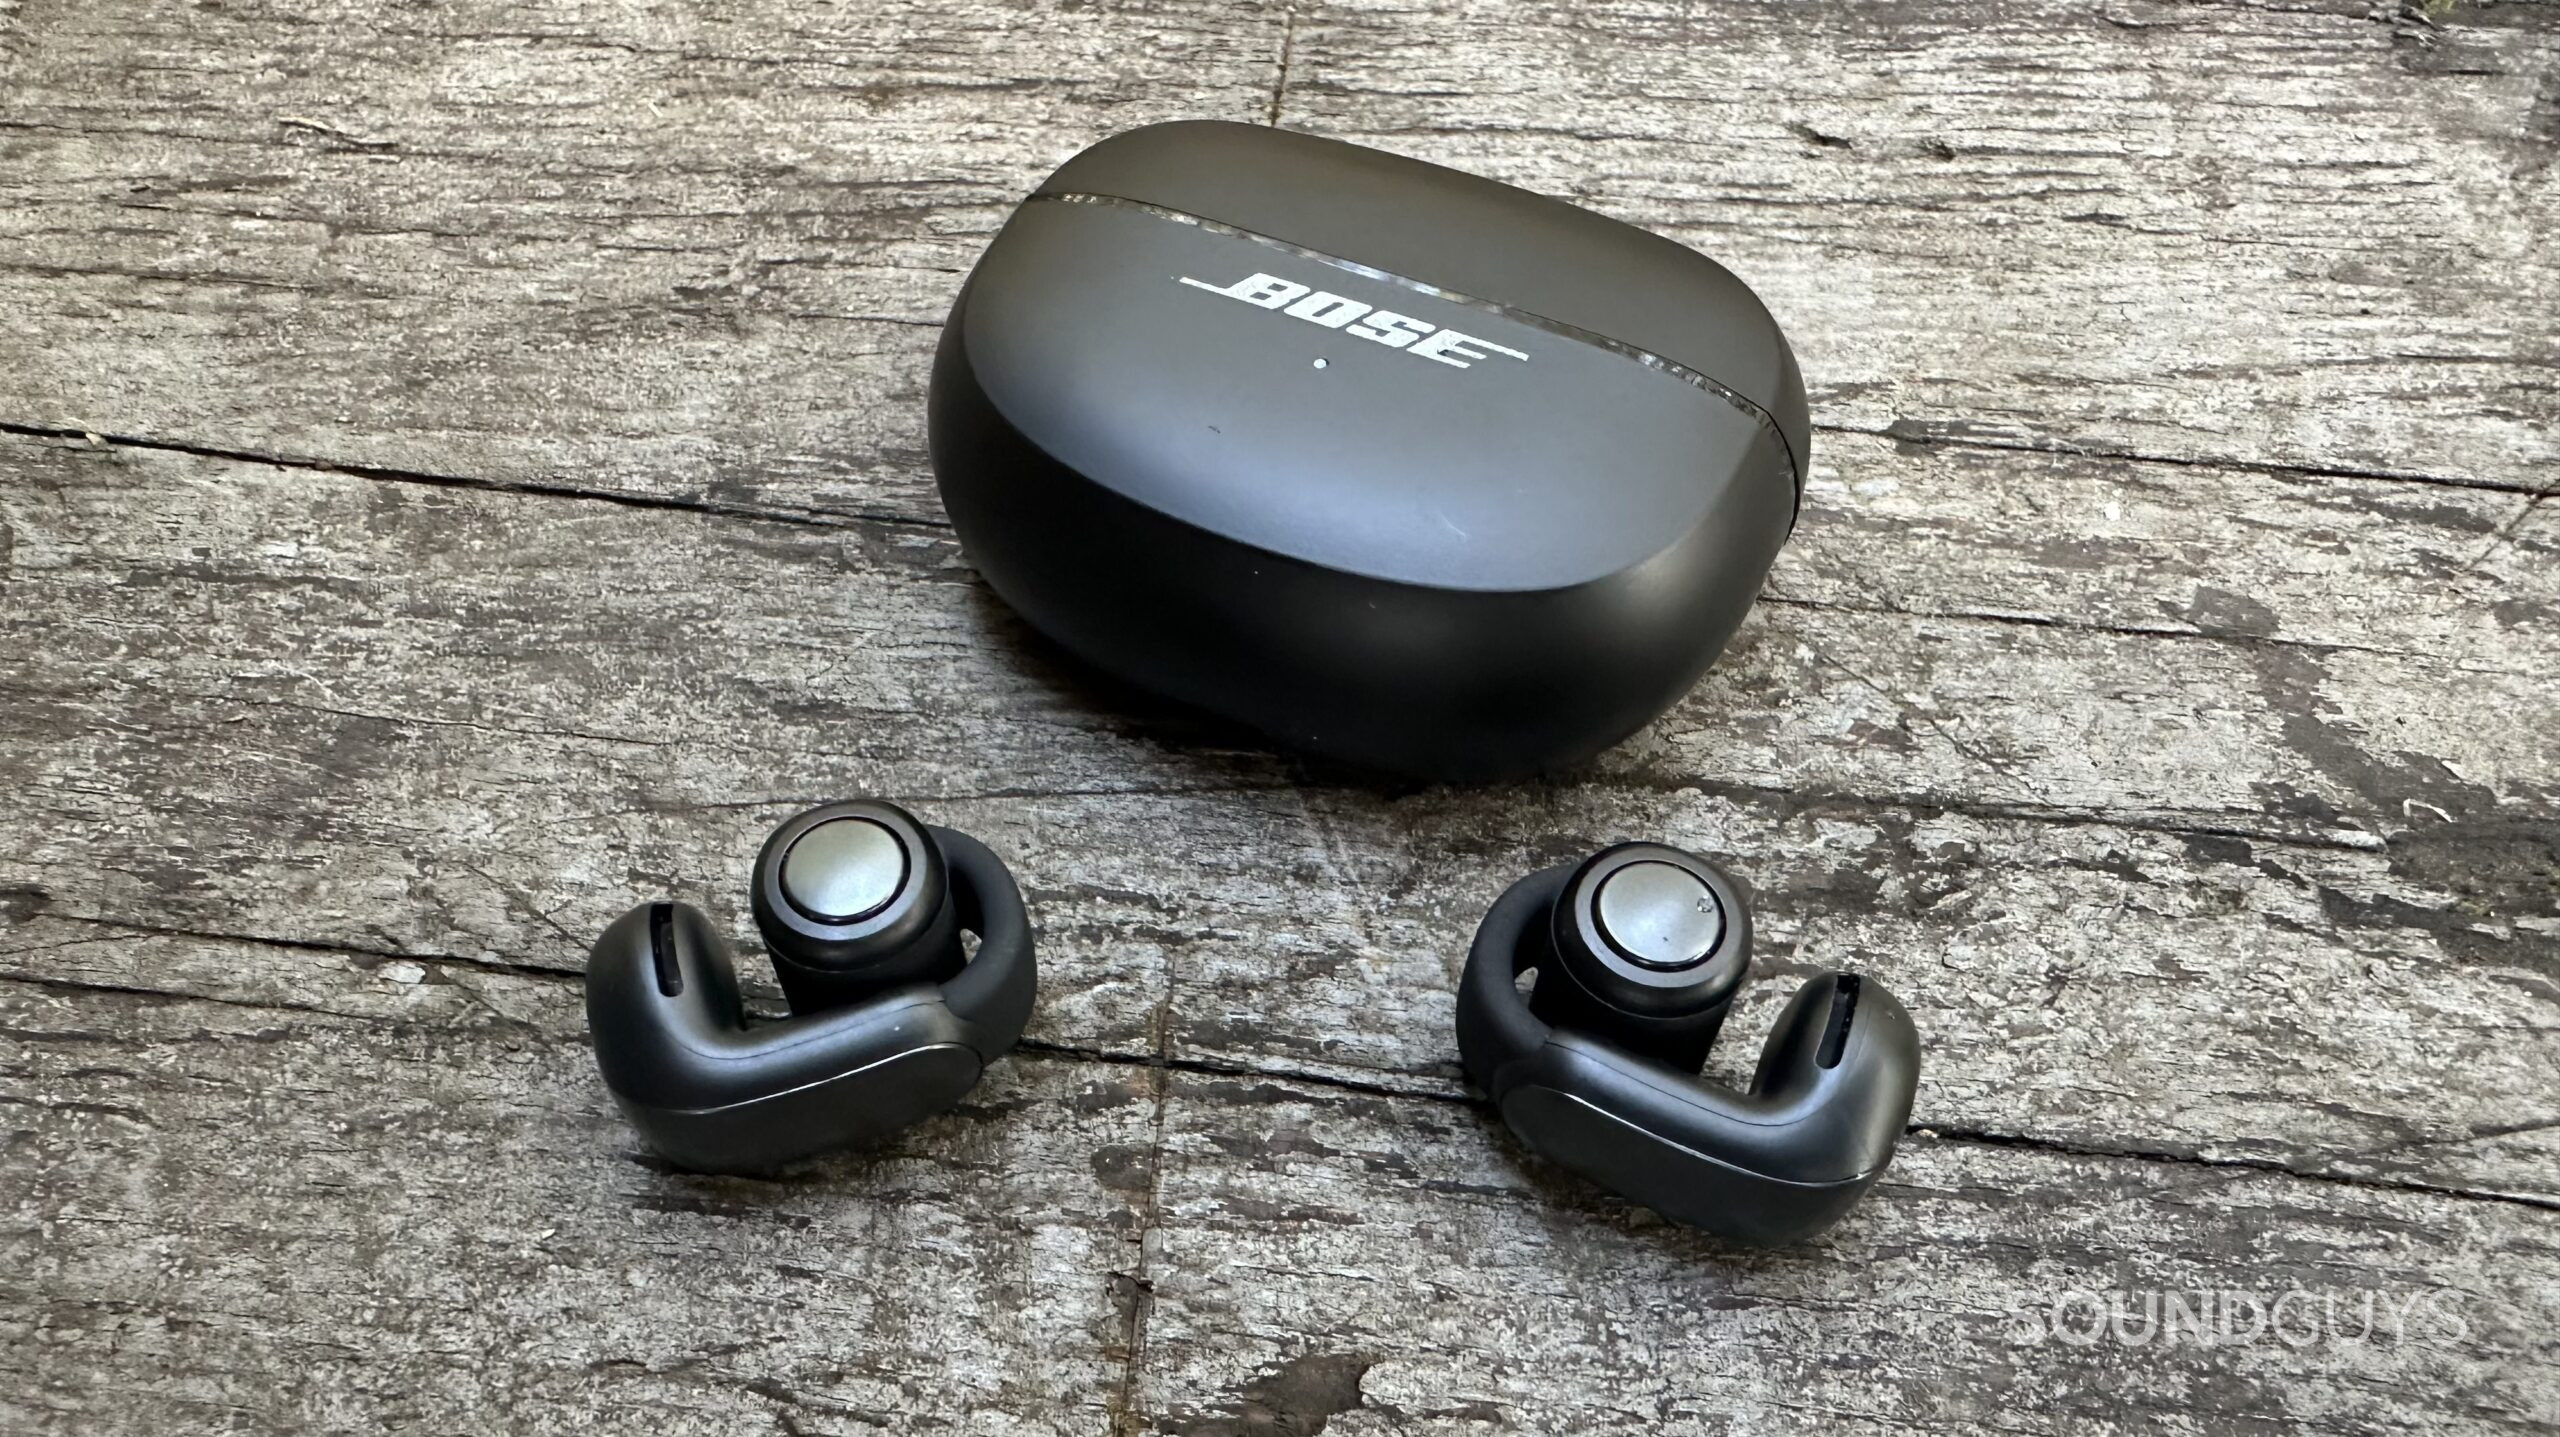 Bose Ultimate Open Earbuds and their charging case on a grey bench